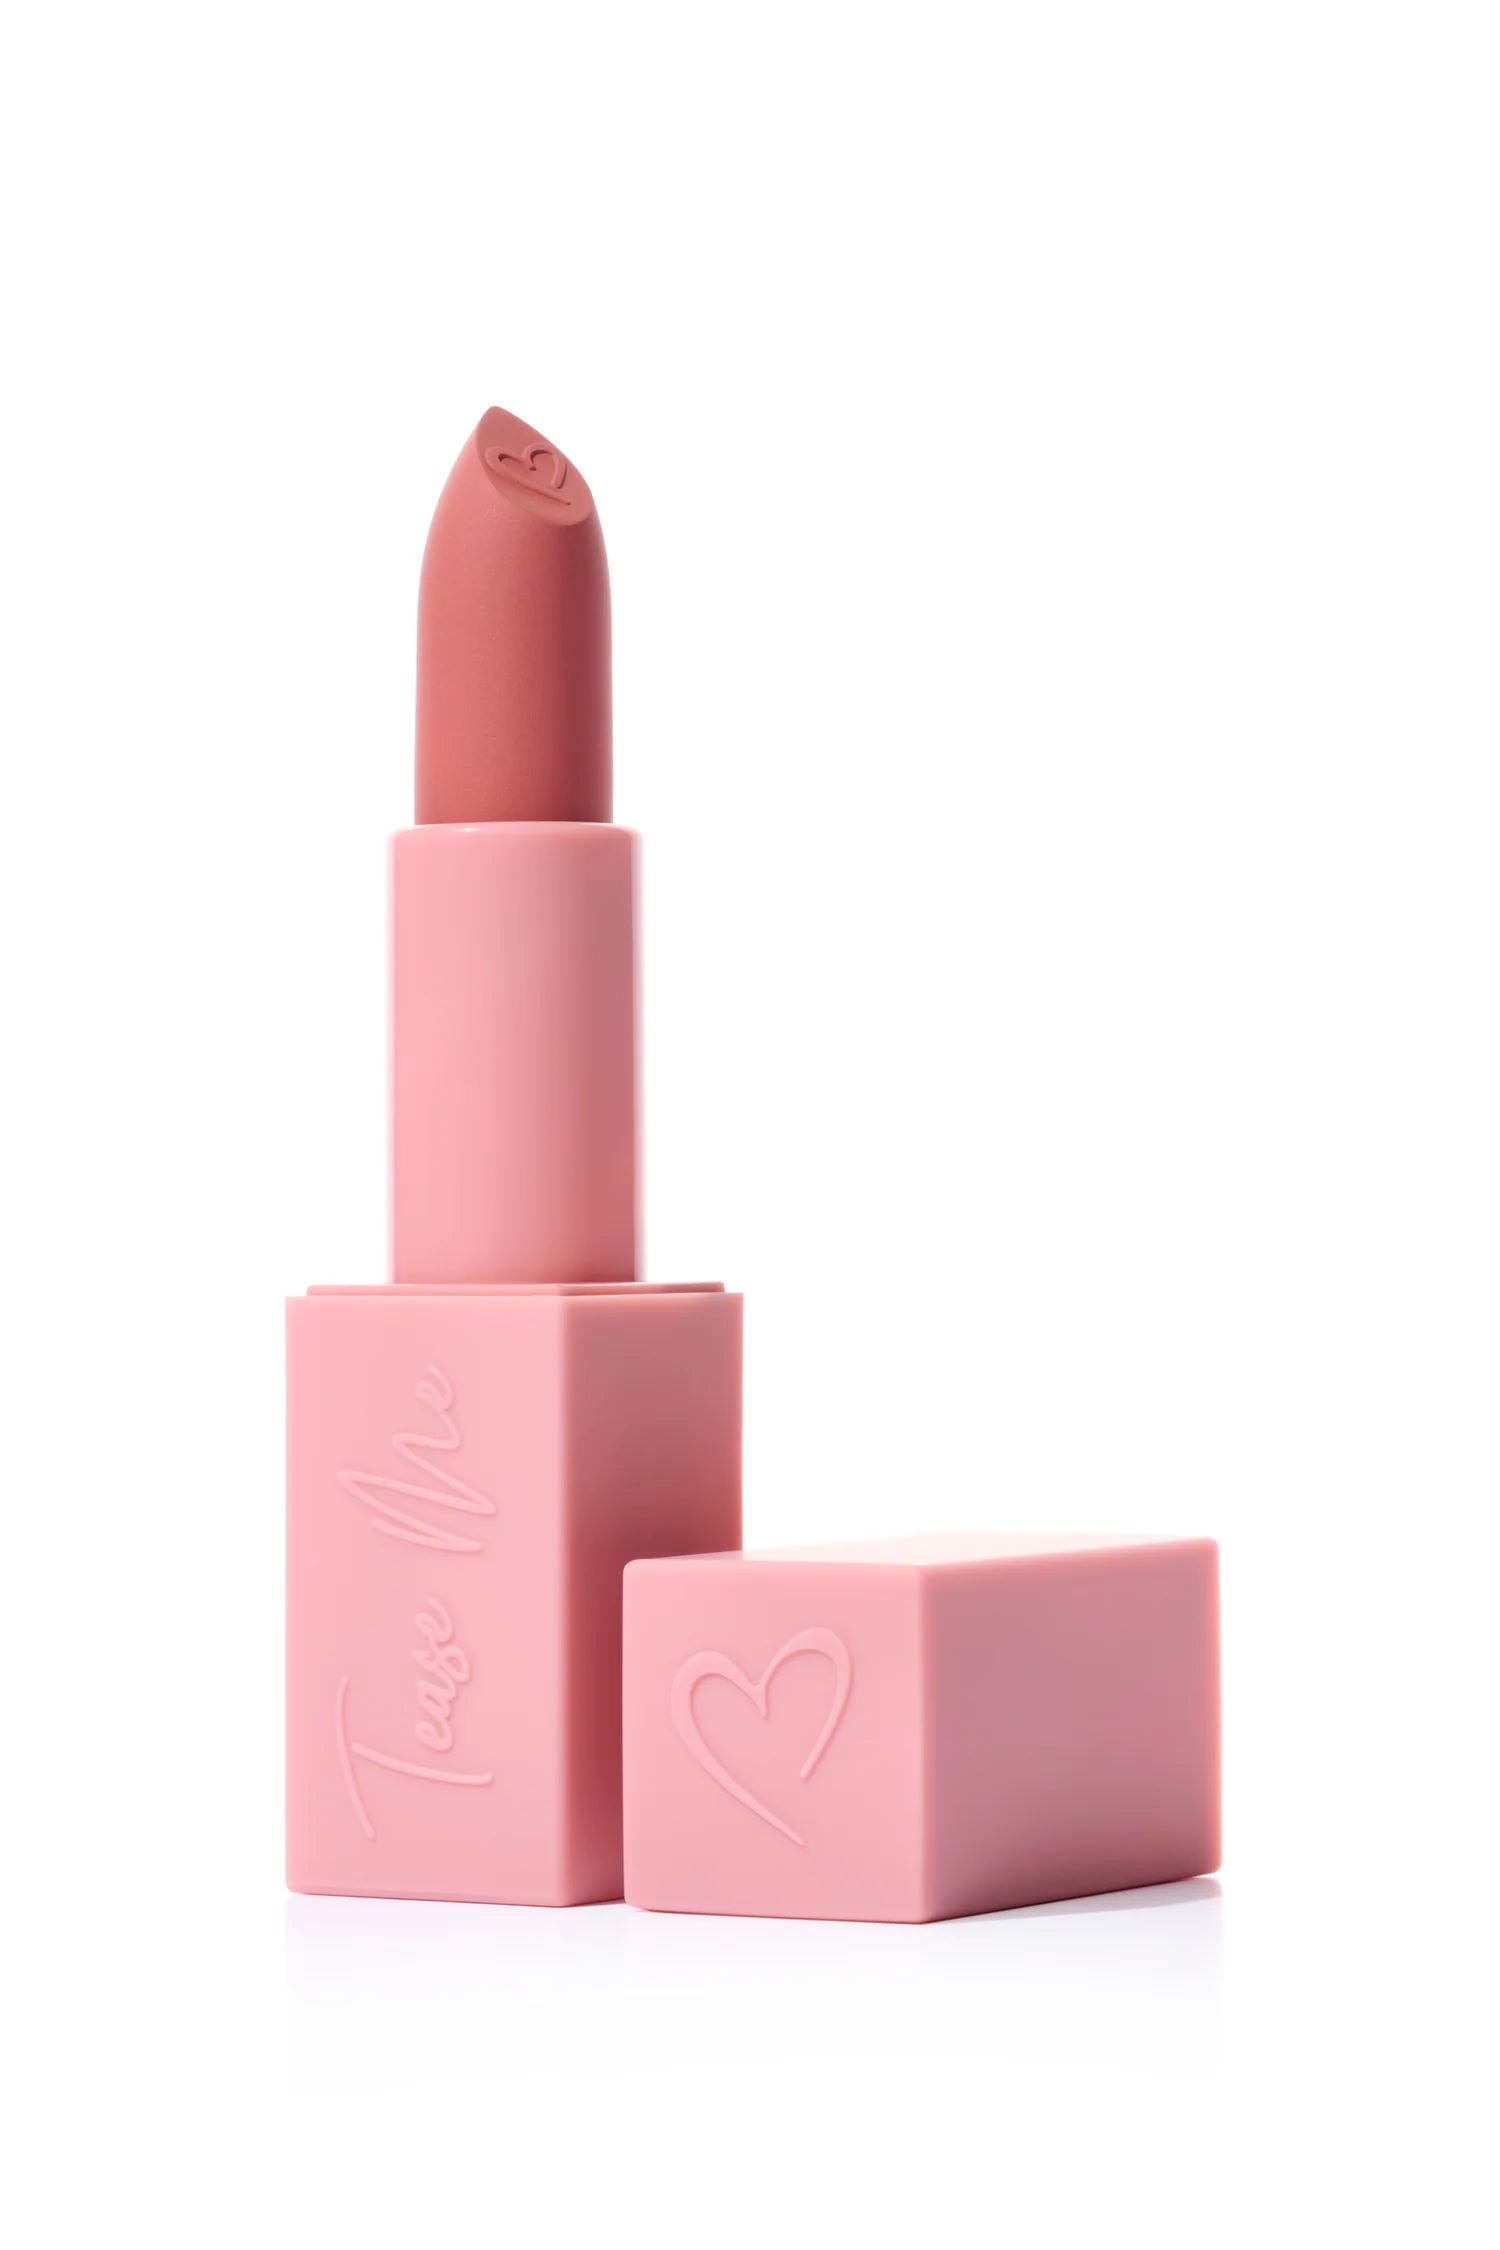 Beauty Creations - Tease Me Collection Lipstick - My Weakness